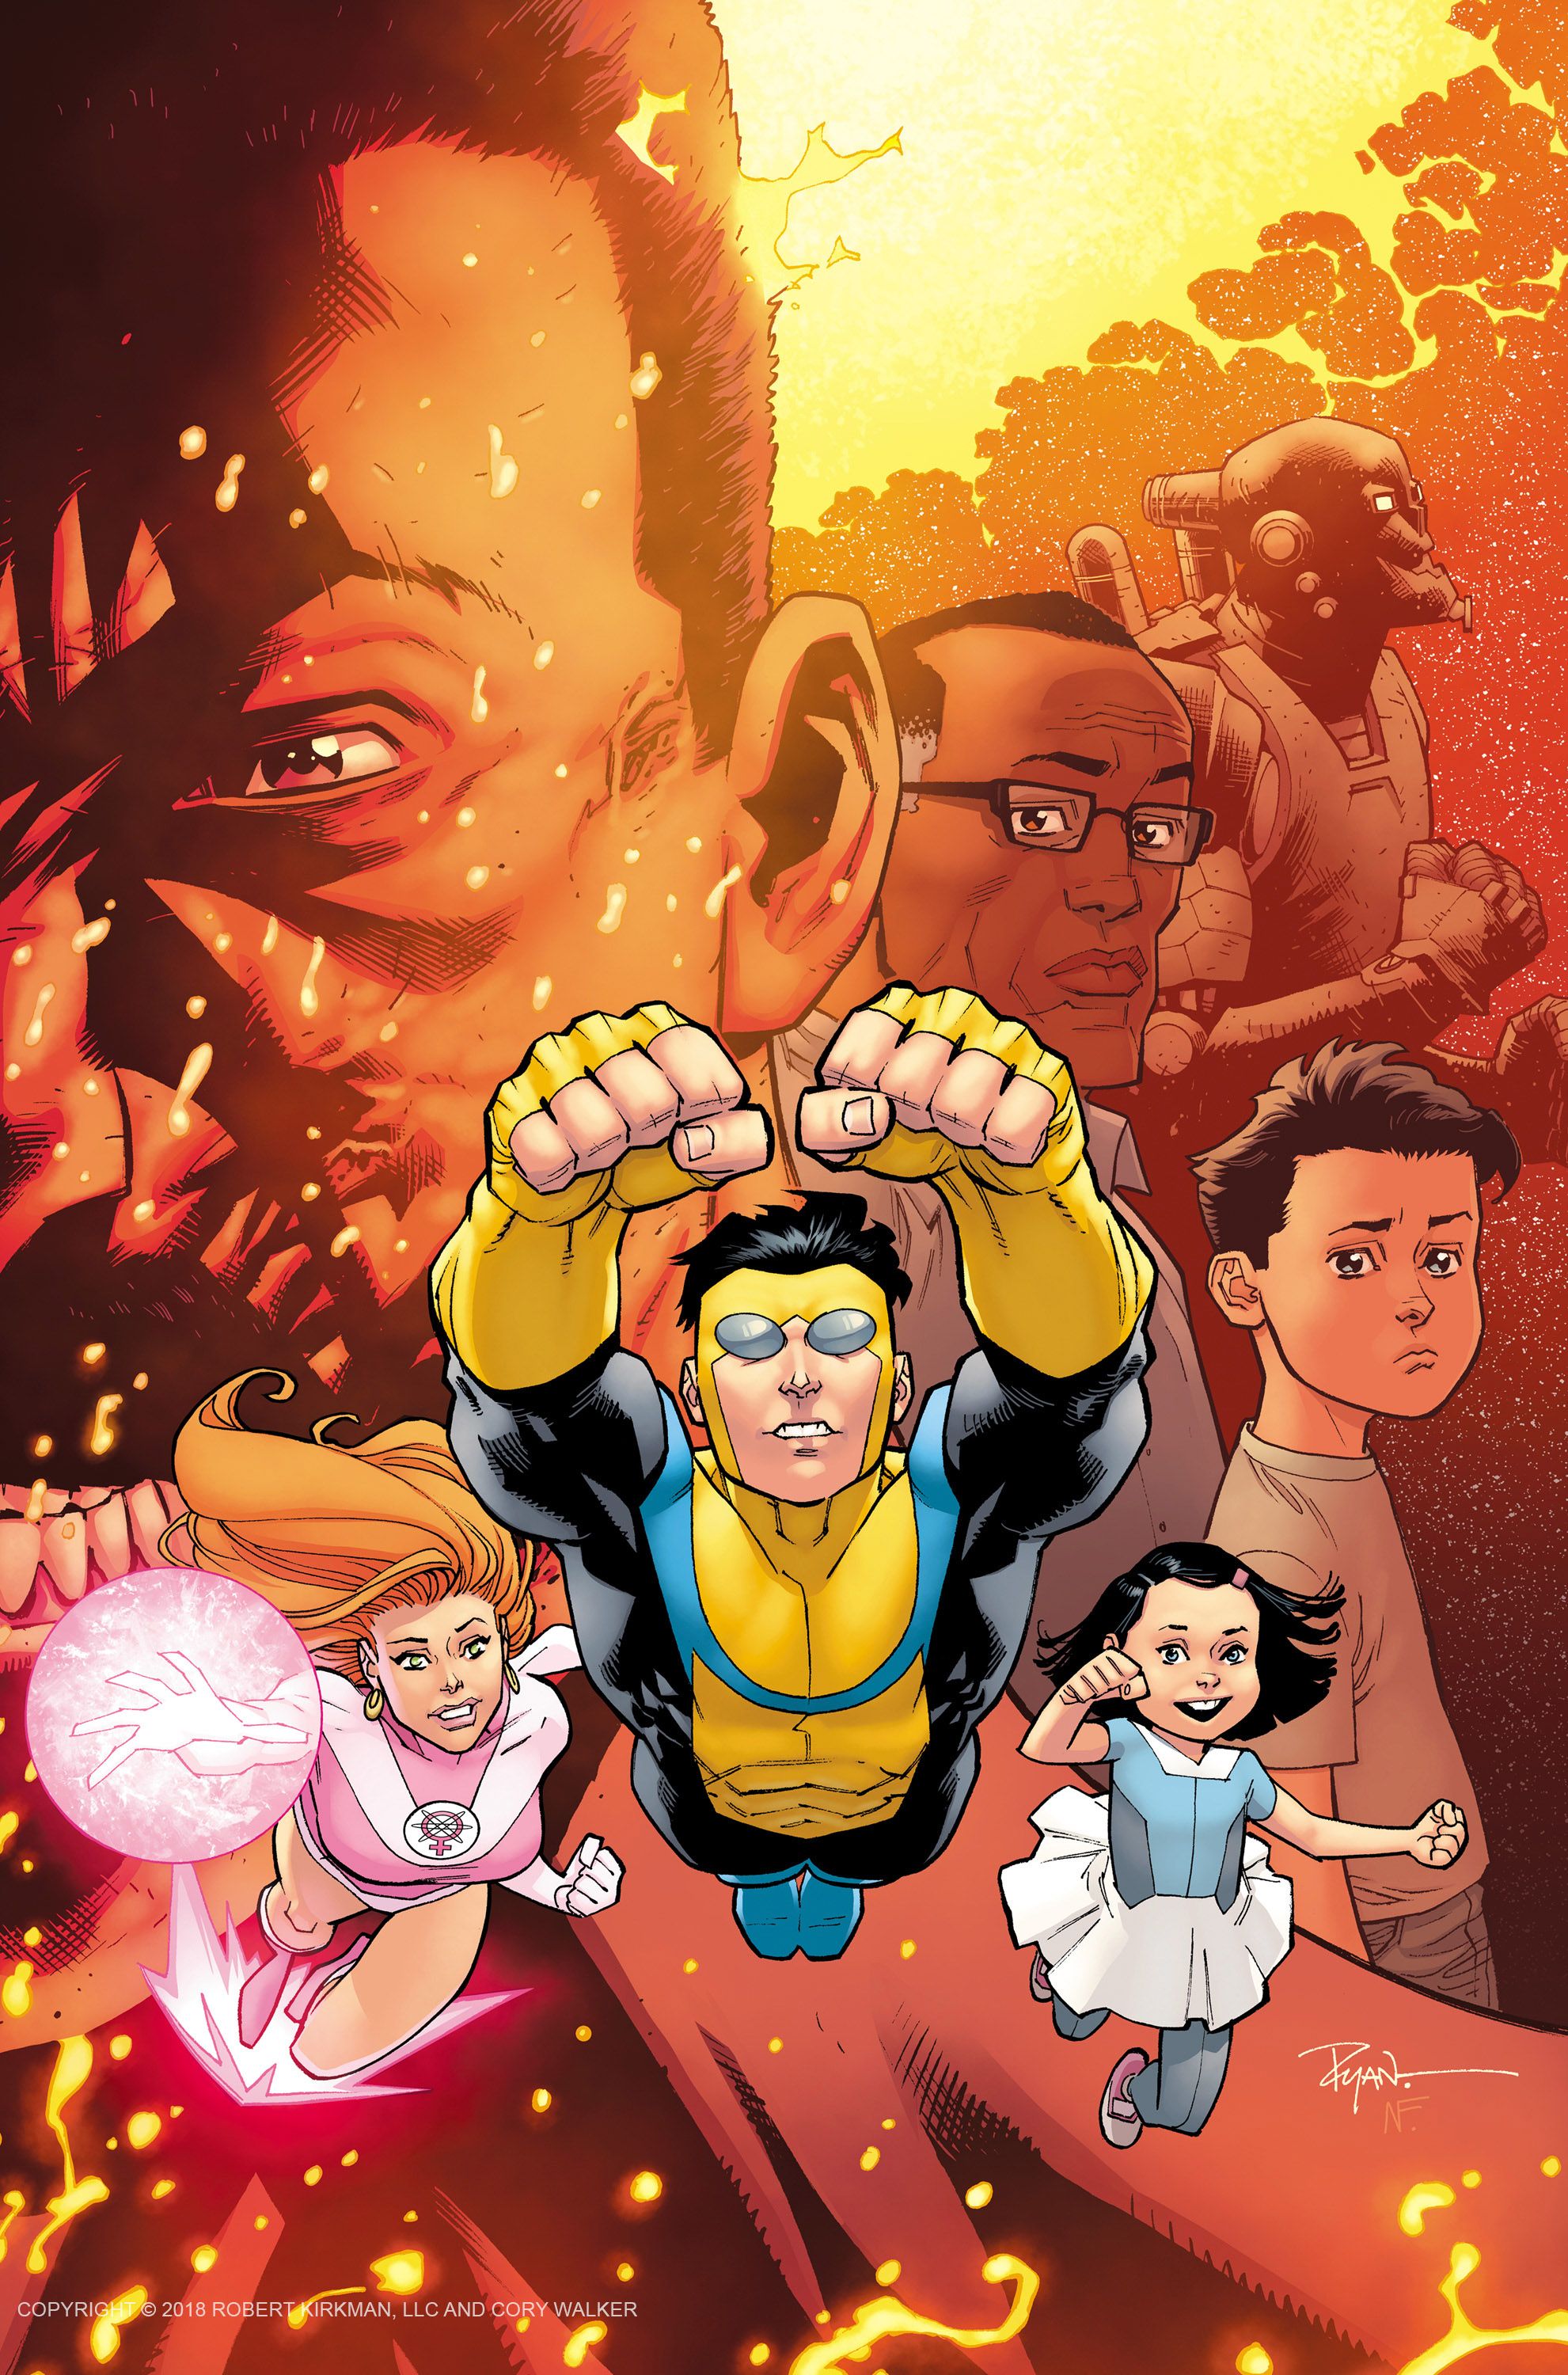 Invincible, Animated Series, Movie, and More!